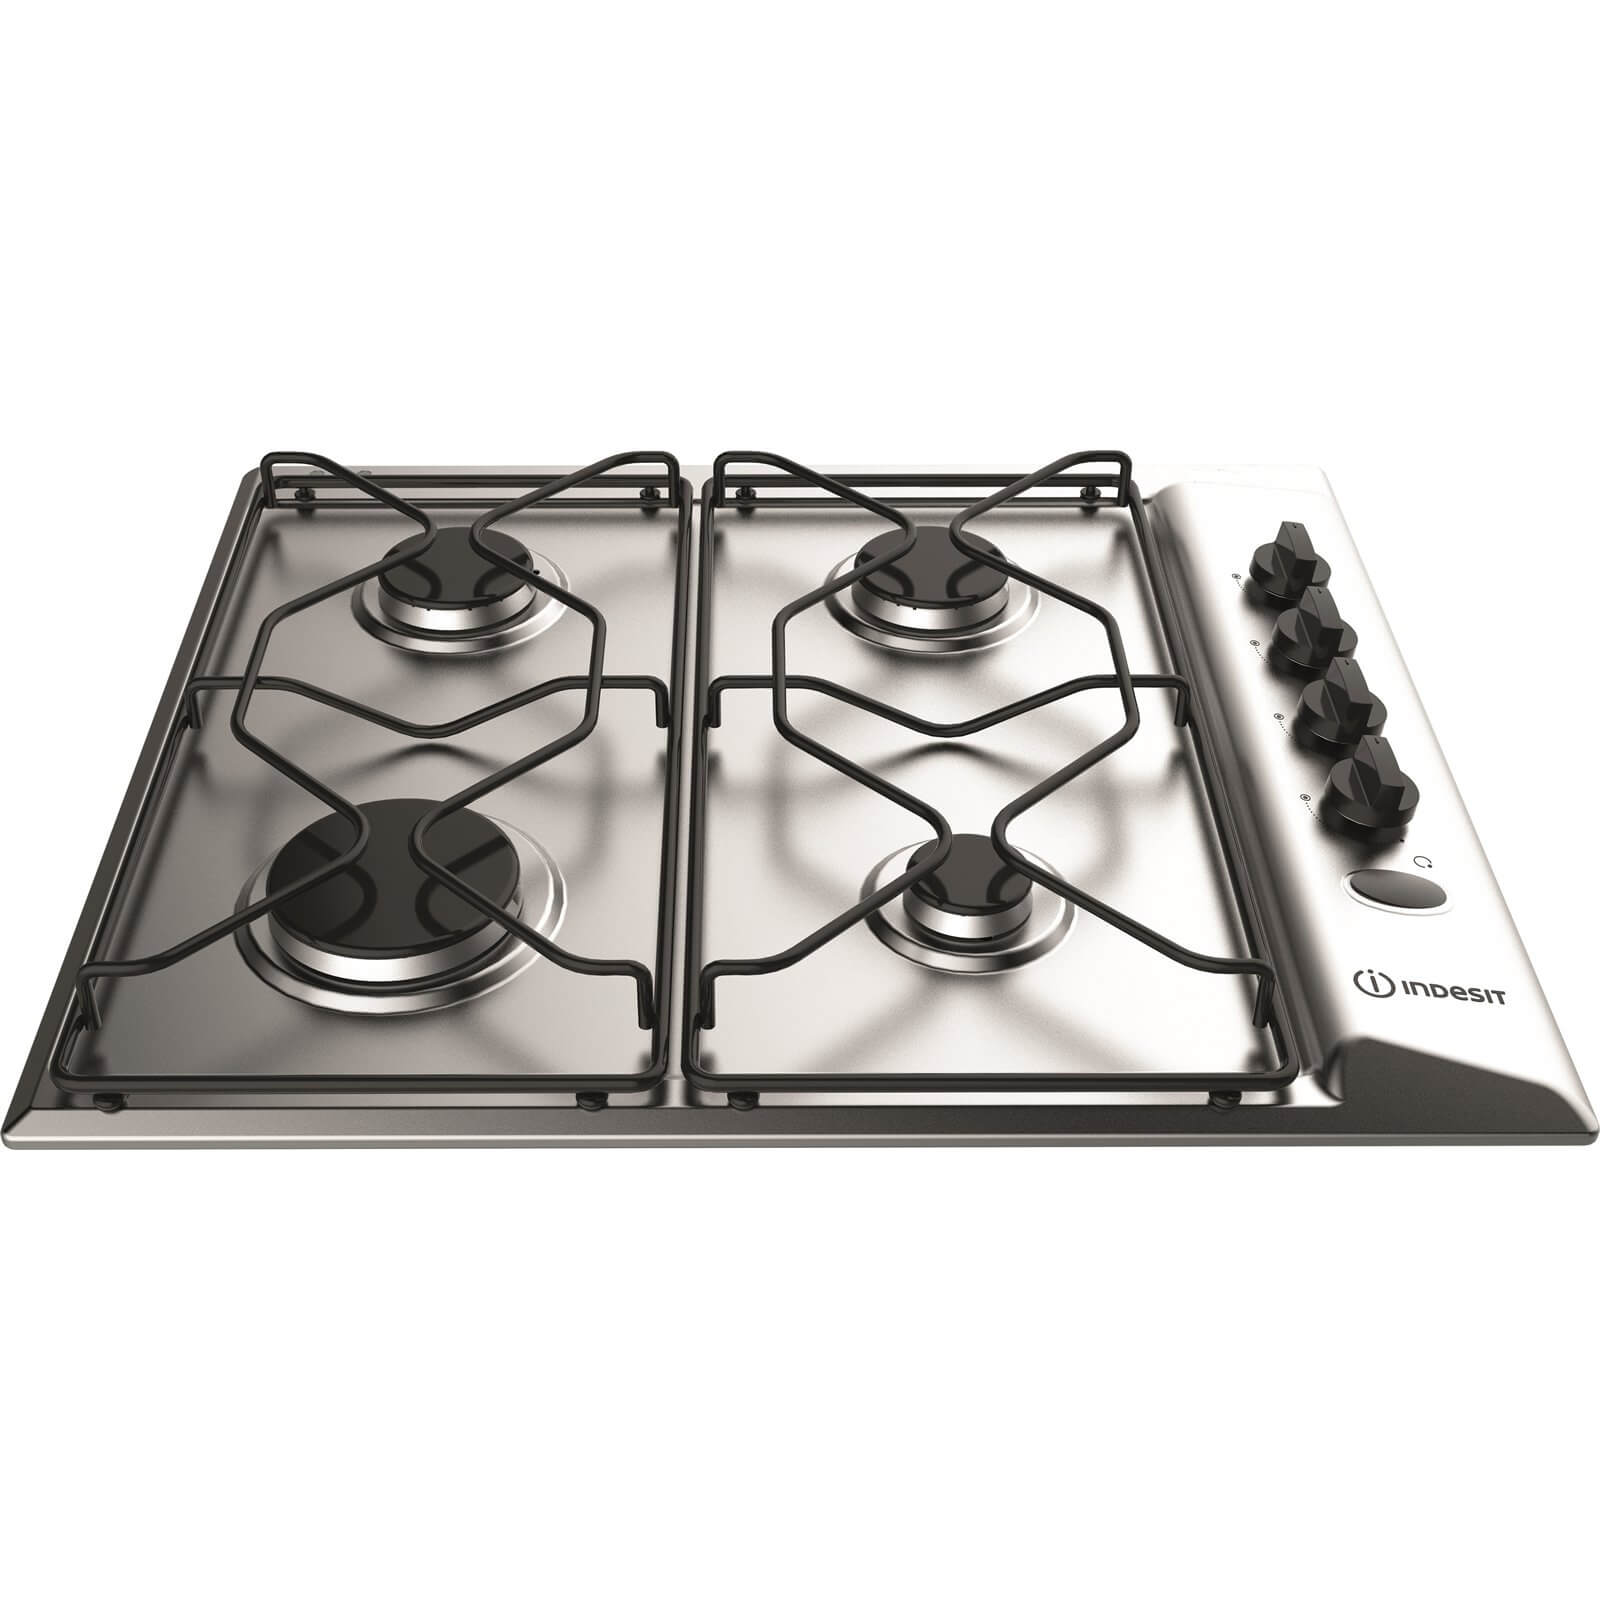 Indesit PAA 642 IX/I WE Gas Hob - Stainless Steel